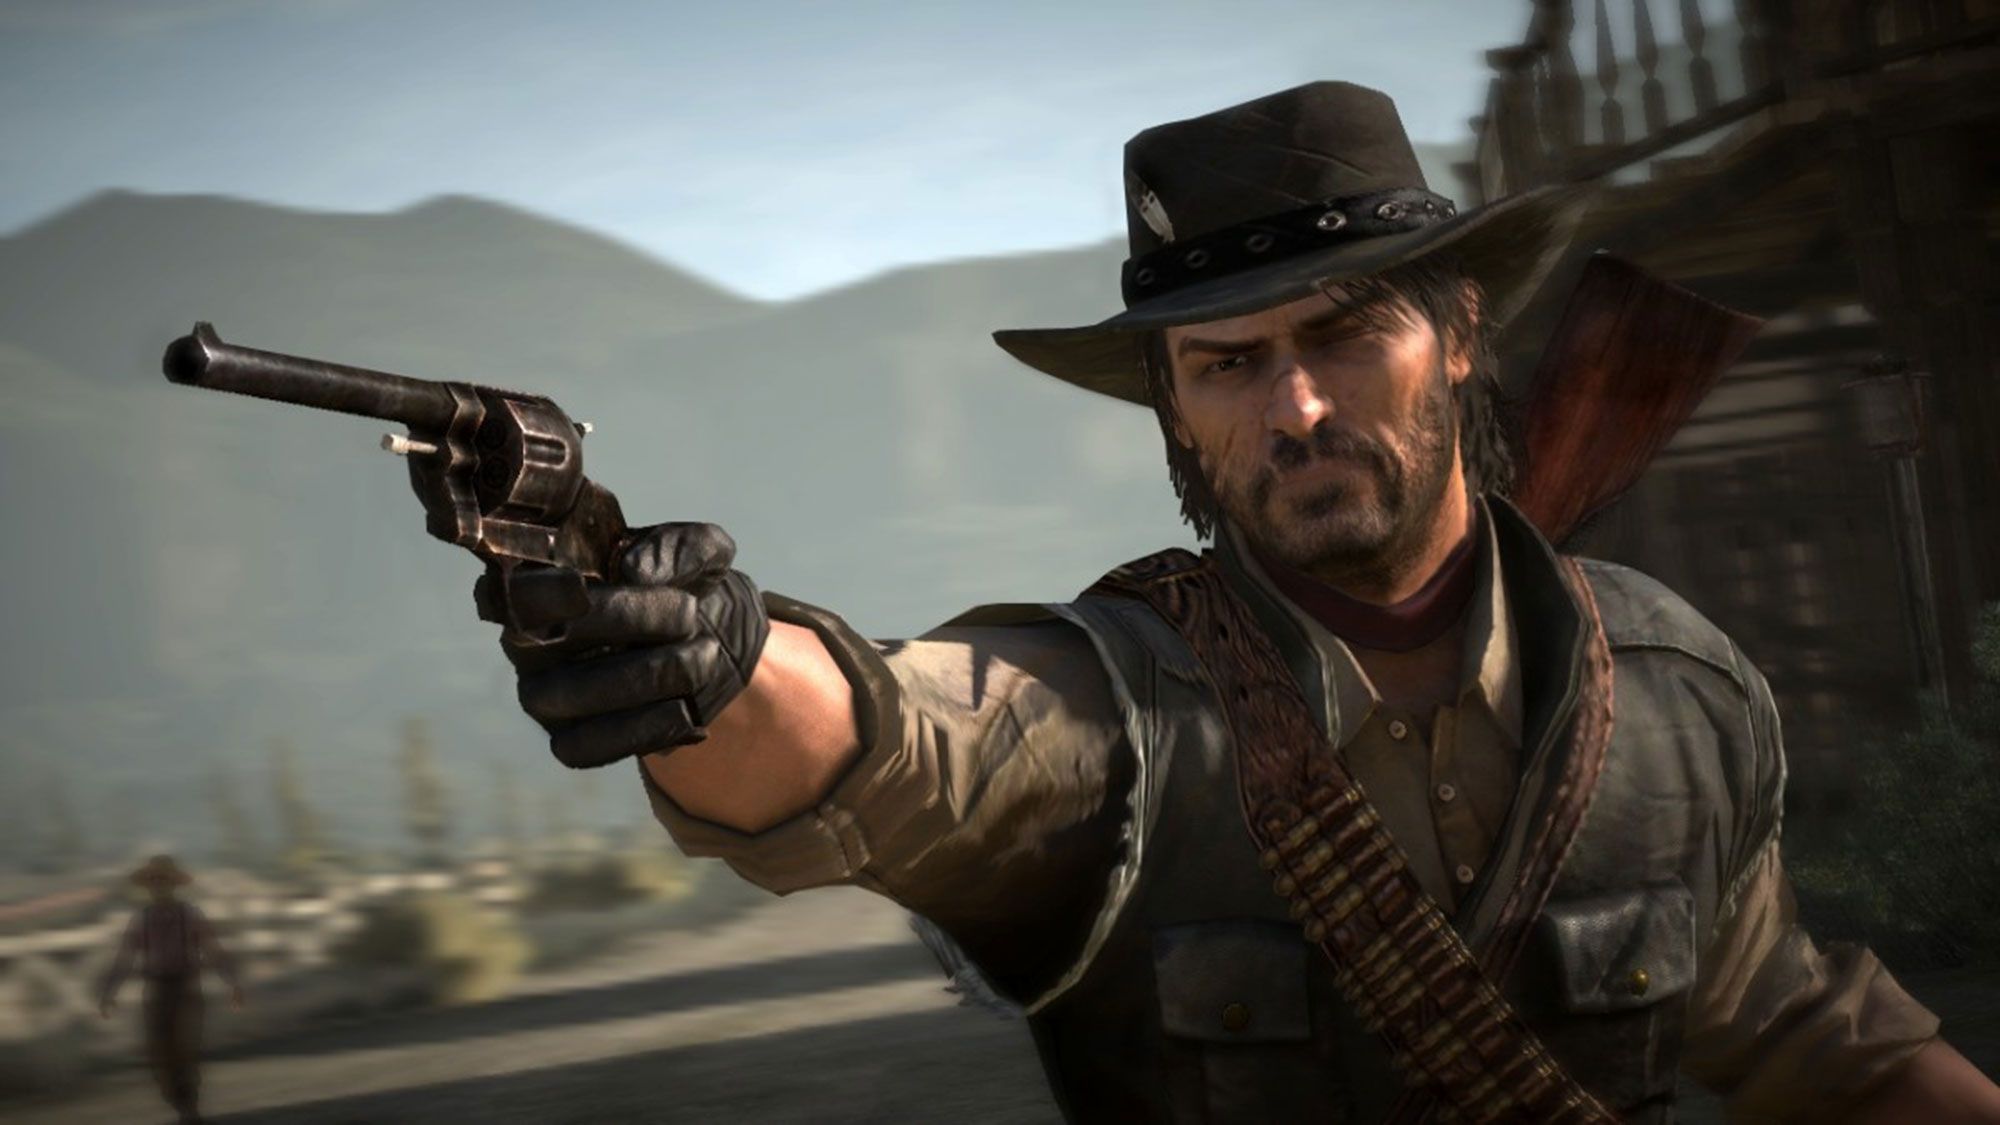 Red Dead Redemption fans turn their ire against Rockstar after bewildering  PS4 port choice: 'Rockstar is Dutch and we've all become Arthur